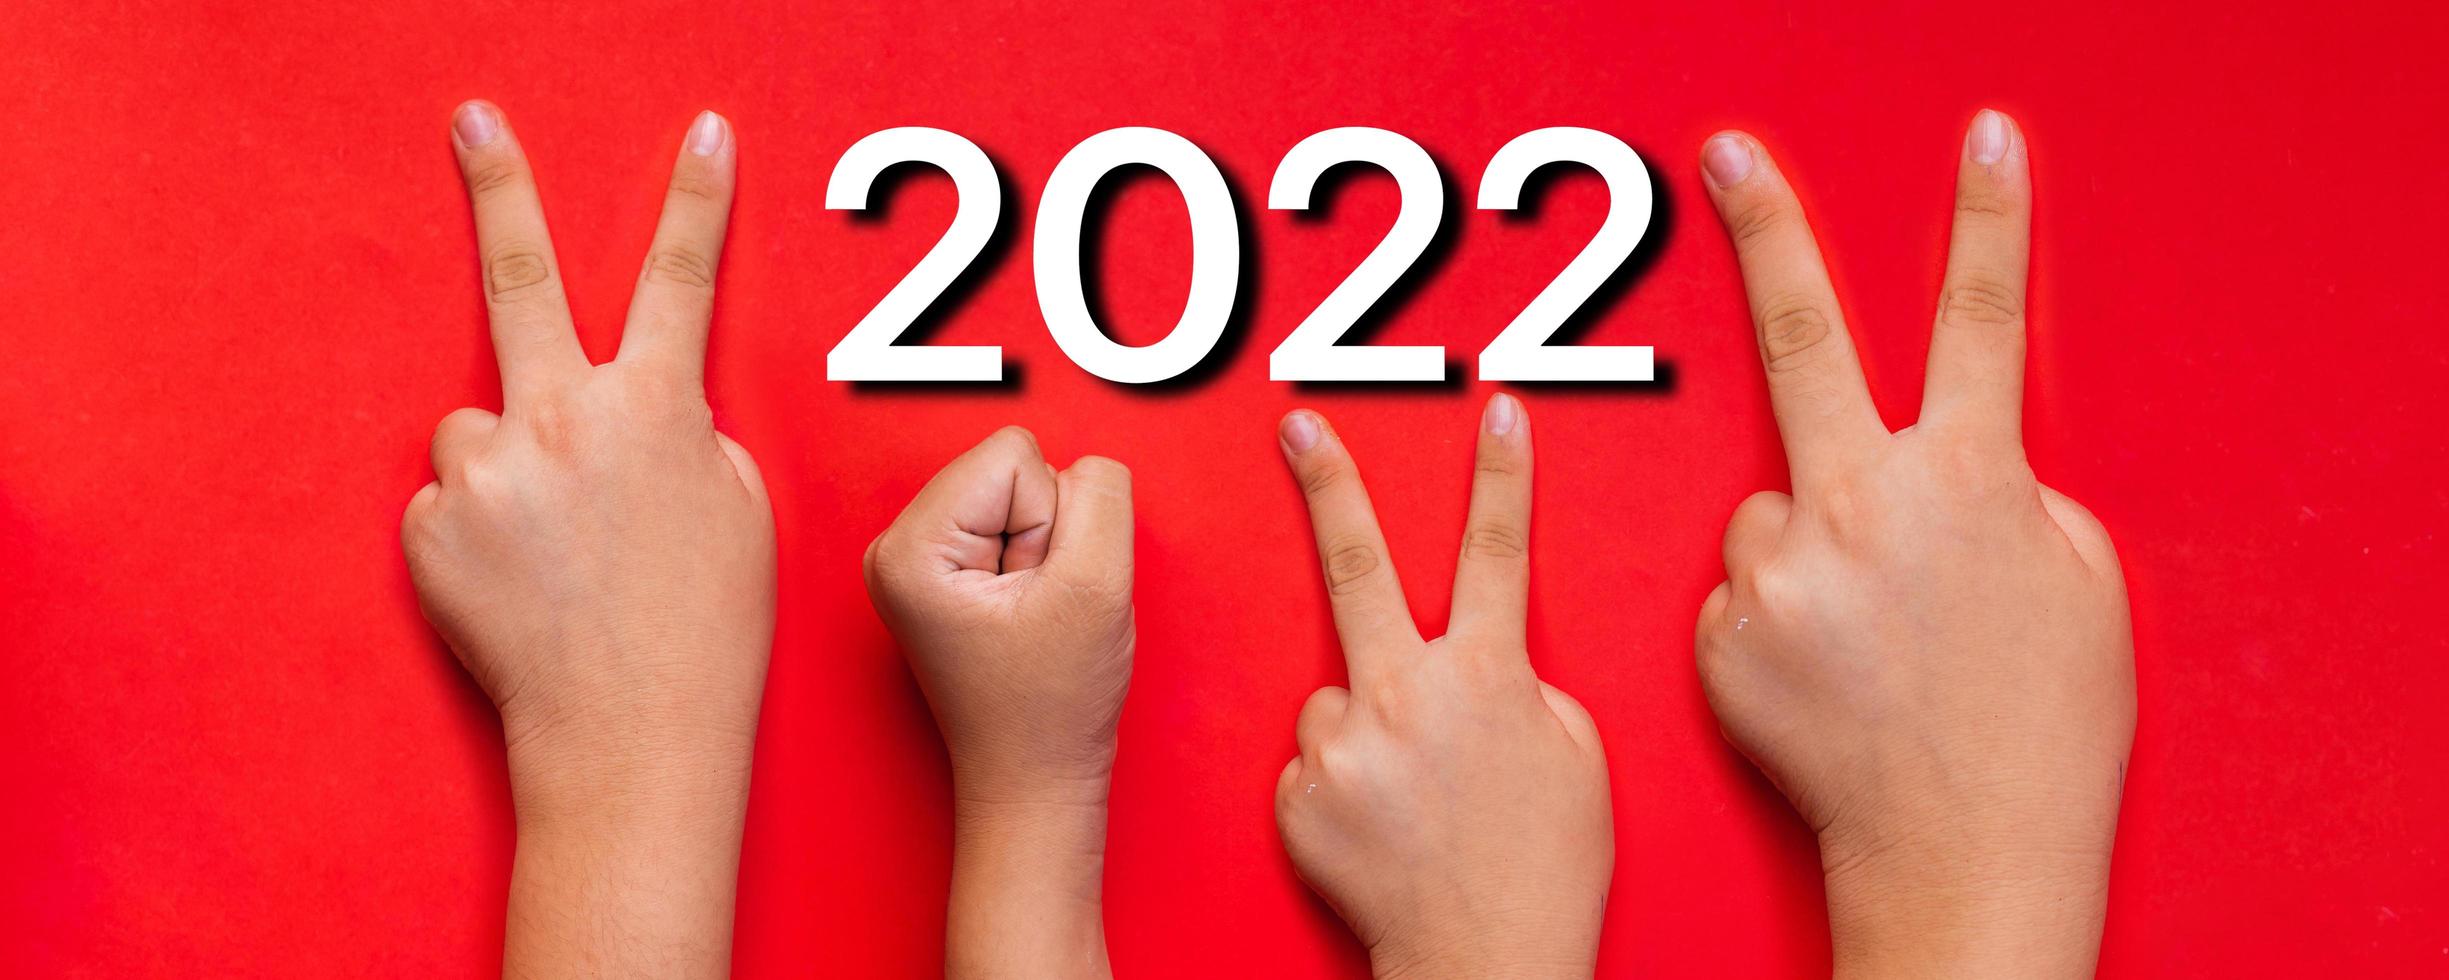 Idea and creative in 2022, finger hand symbol of new year number on red background photo